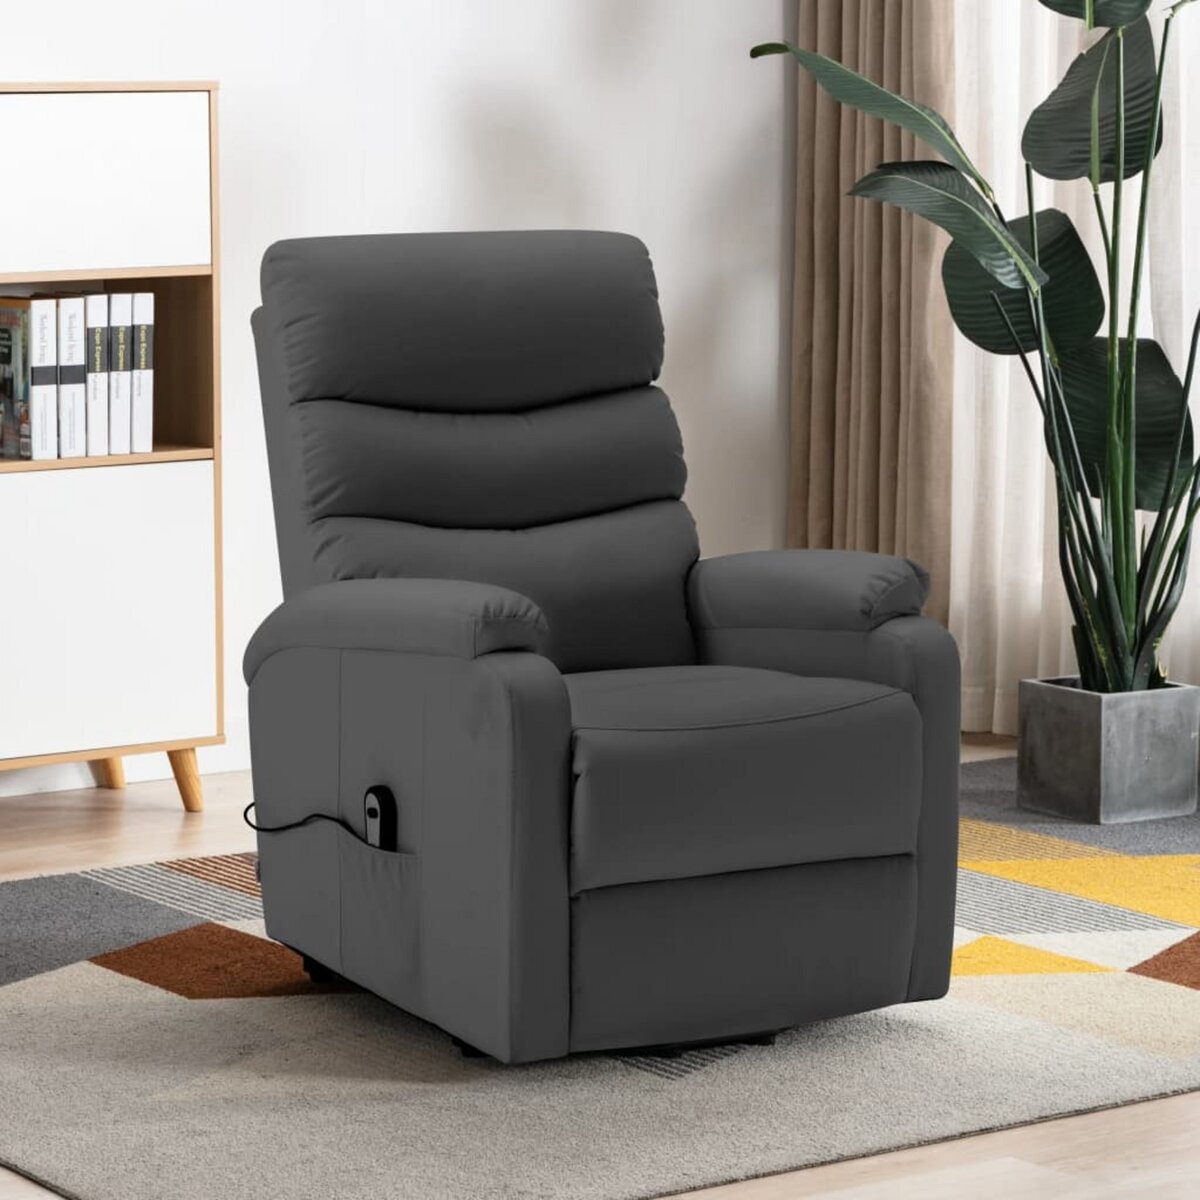 VIDAXL Fauteuil inclinable Anthracite Similicuir